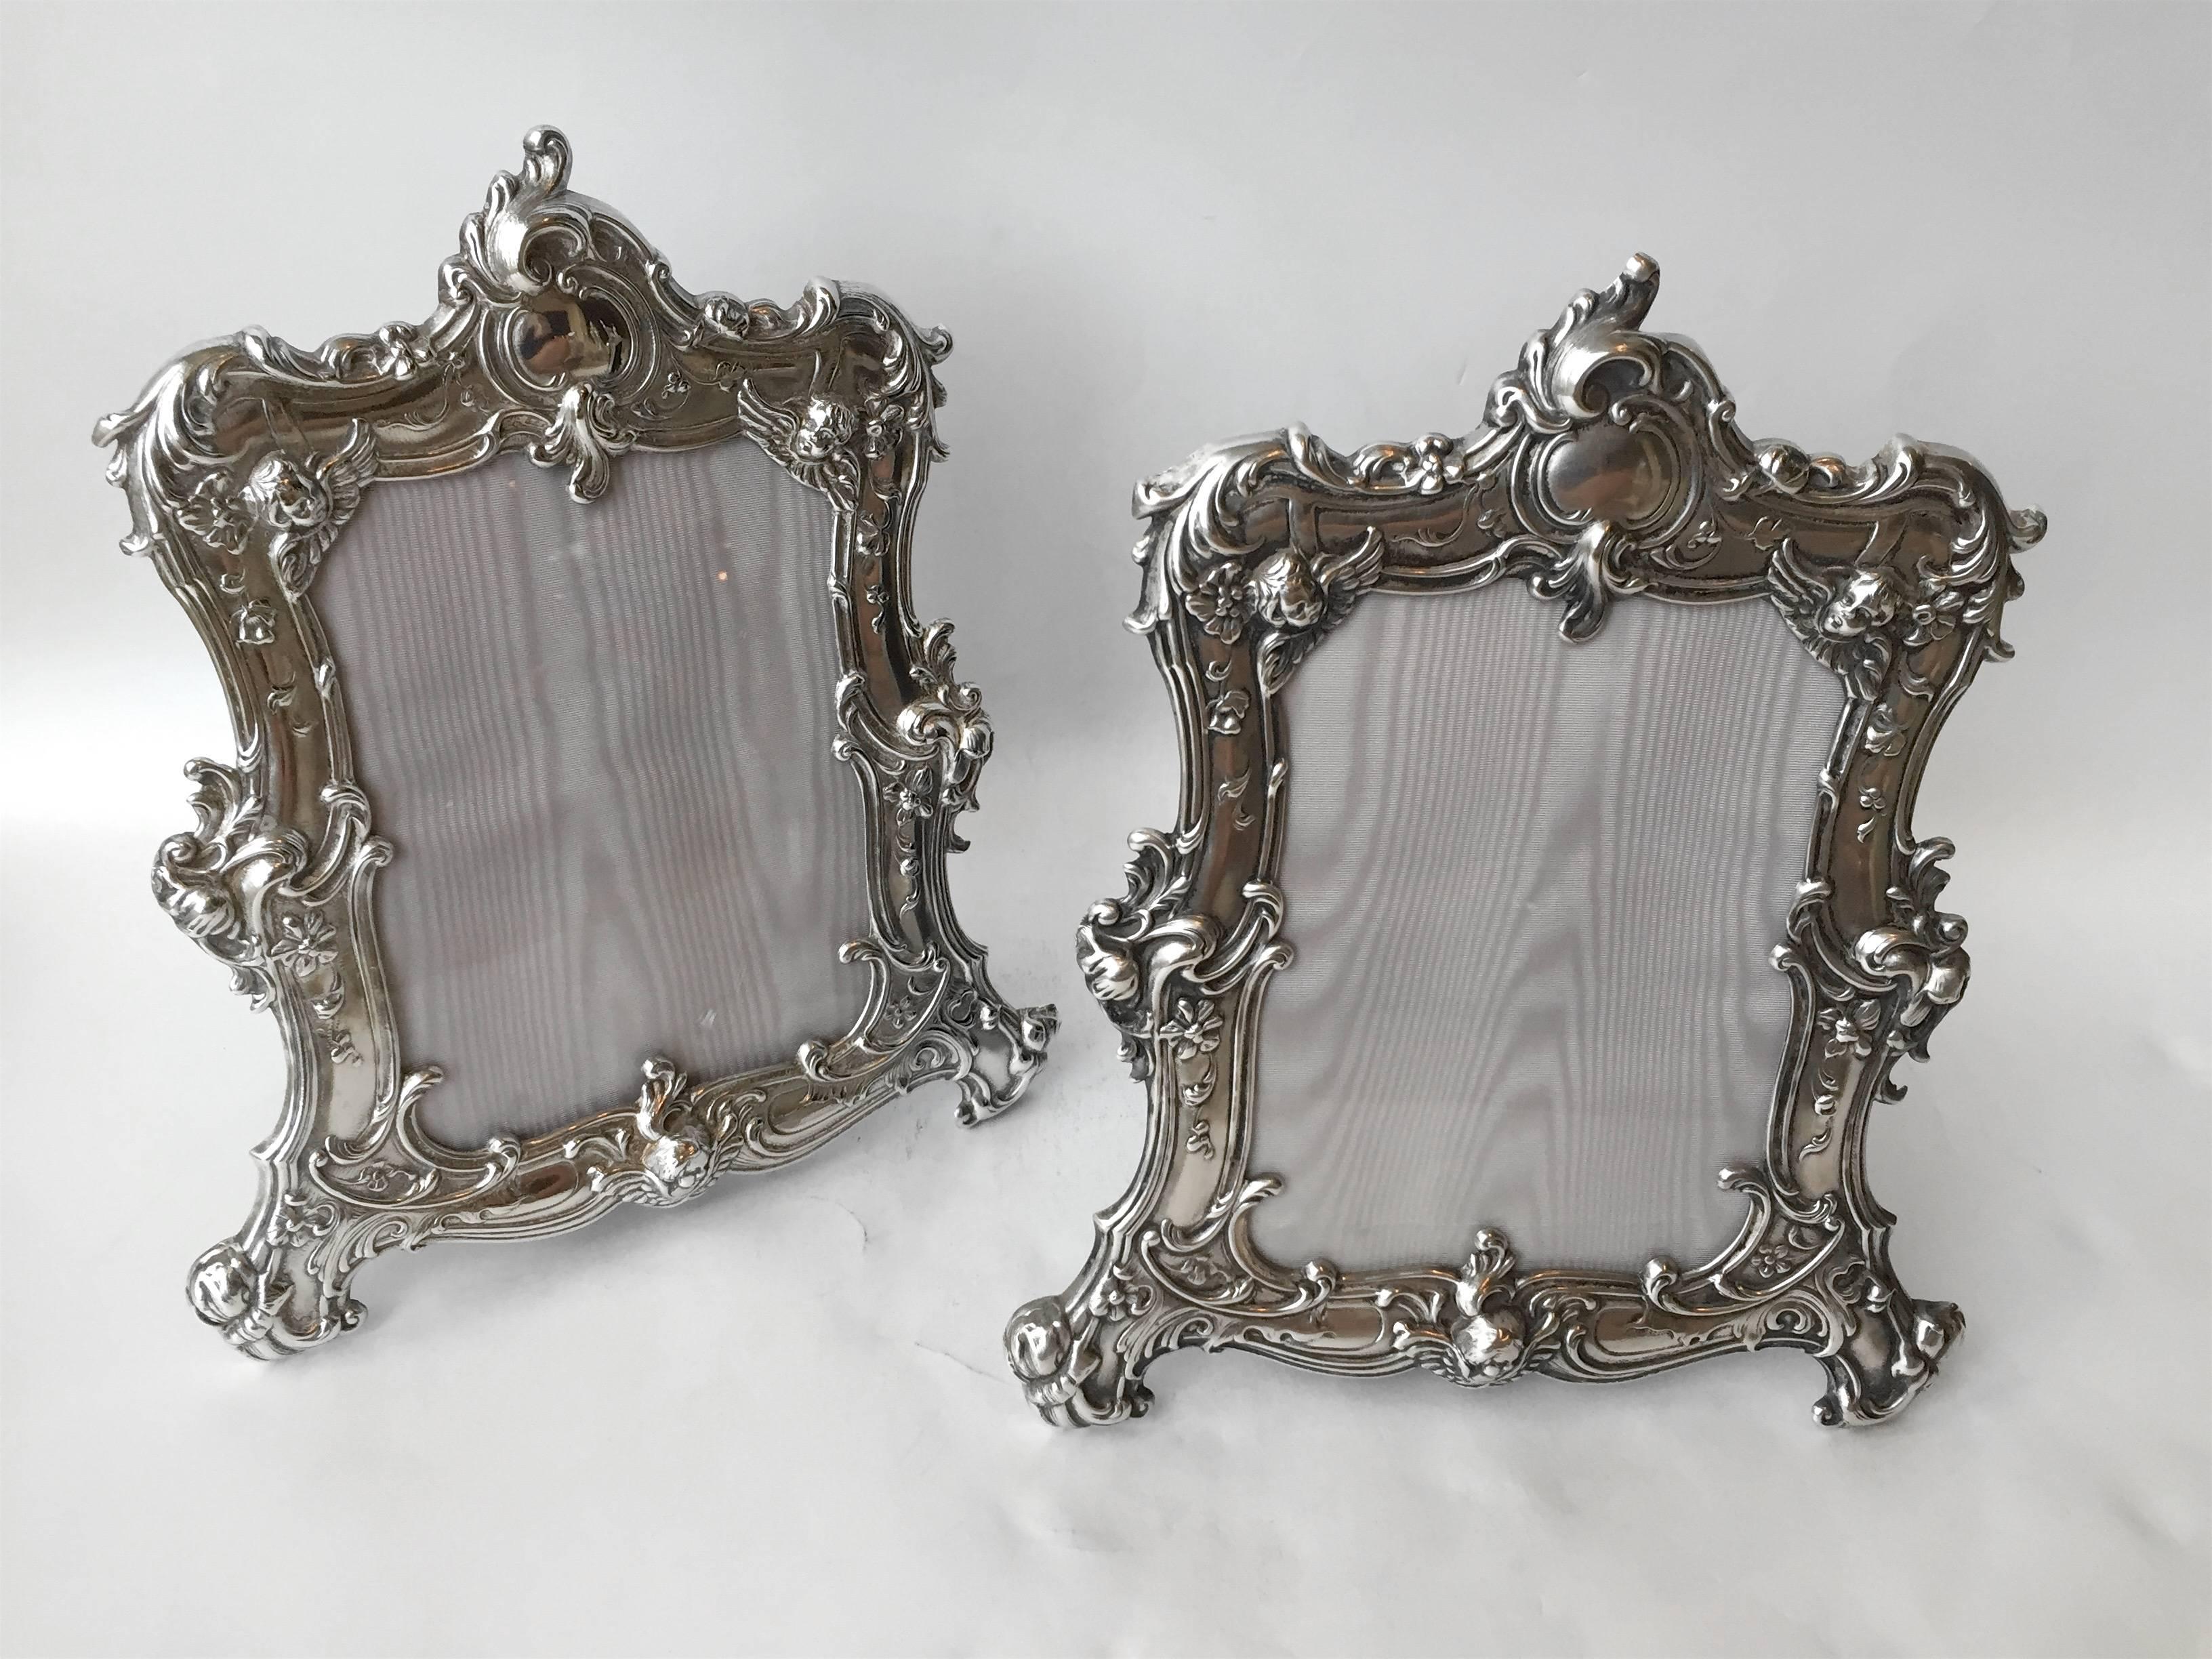 Just beautiful is this pair of Art Nouveau photo frames by Gorham they are in fantastic condition and will improved with images of your family or friends.
  